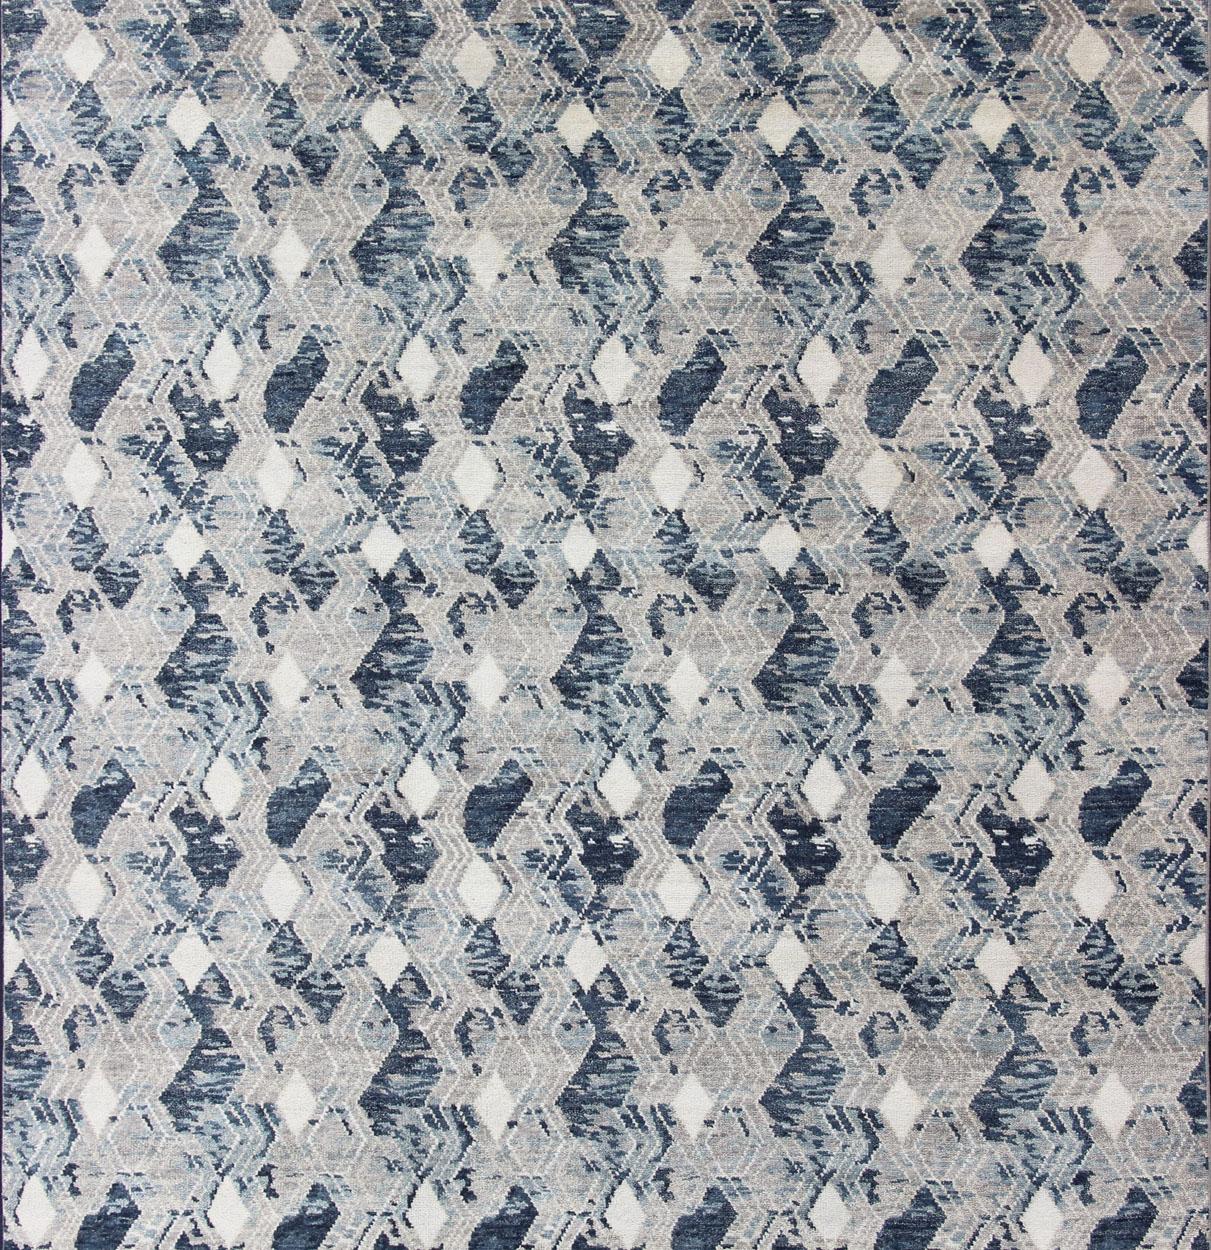 Oversized Modern Diamond Designed Indian Area Rug in Blue, Gray, and White For Sale 2